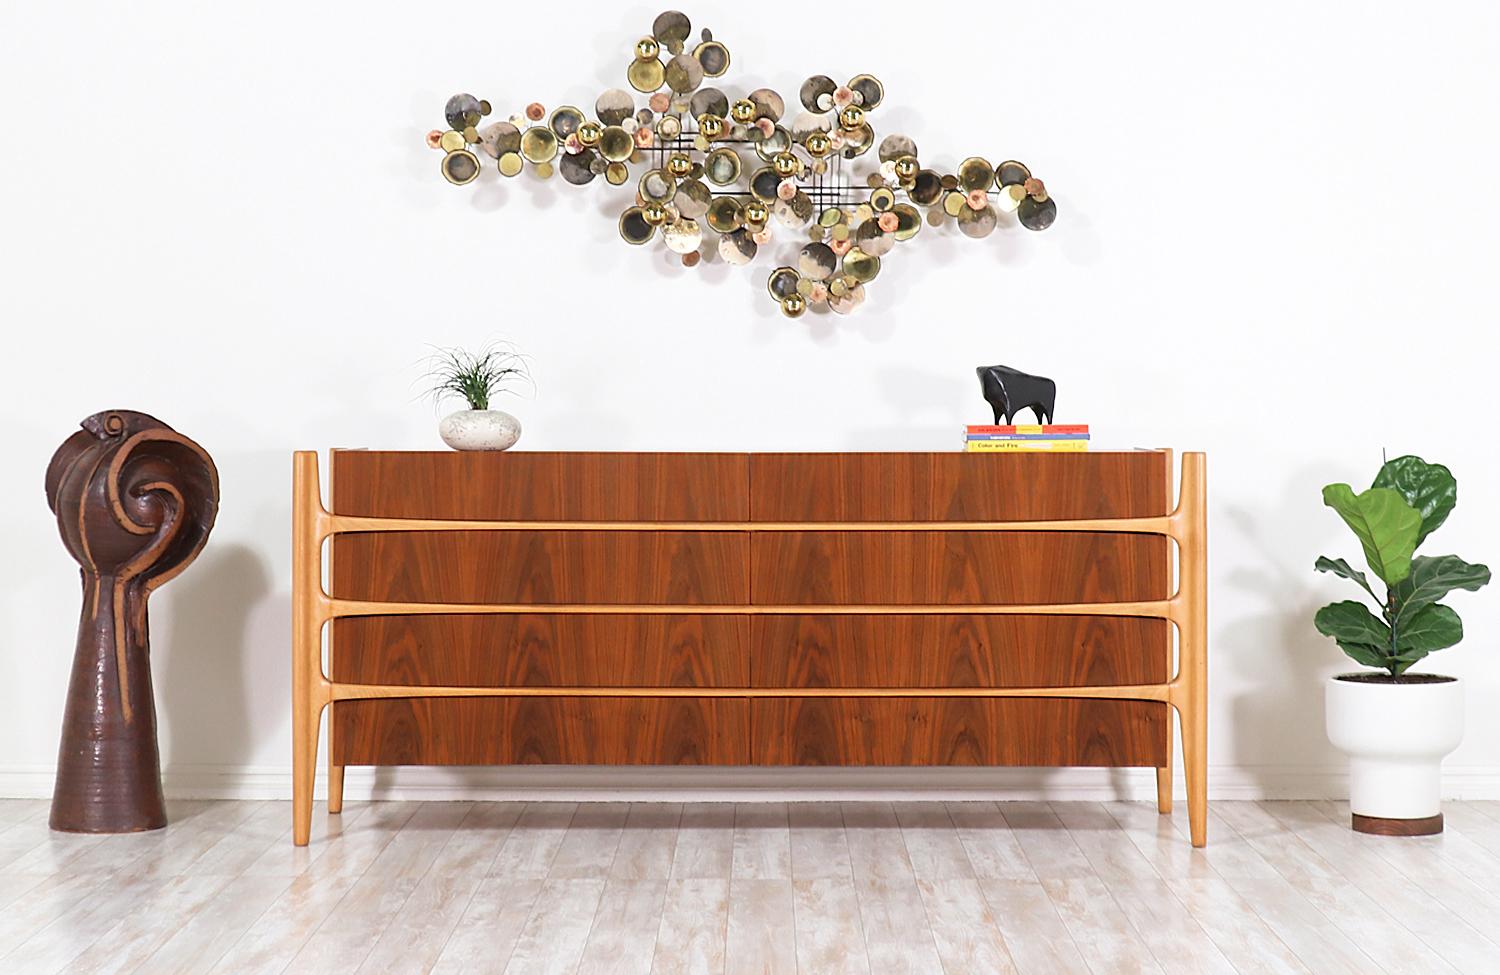 Sculptural Scandinavian Modern eight drawer dresser designed by William Hinn for Urban Furniture’s “Swedish Guild Collection” in Sweden, circa 1950s. This rare and sleek design features a sculpted biomorphic walnut wood body with beech wood carved